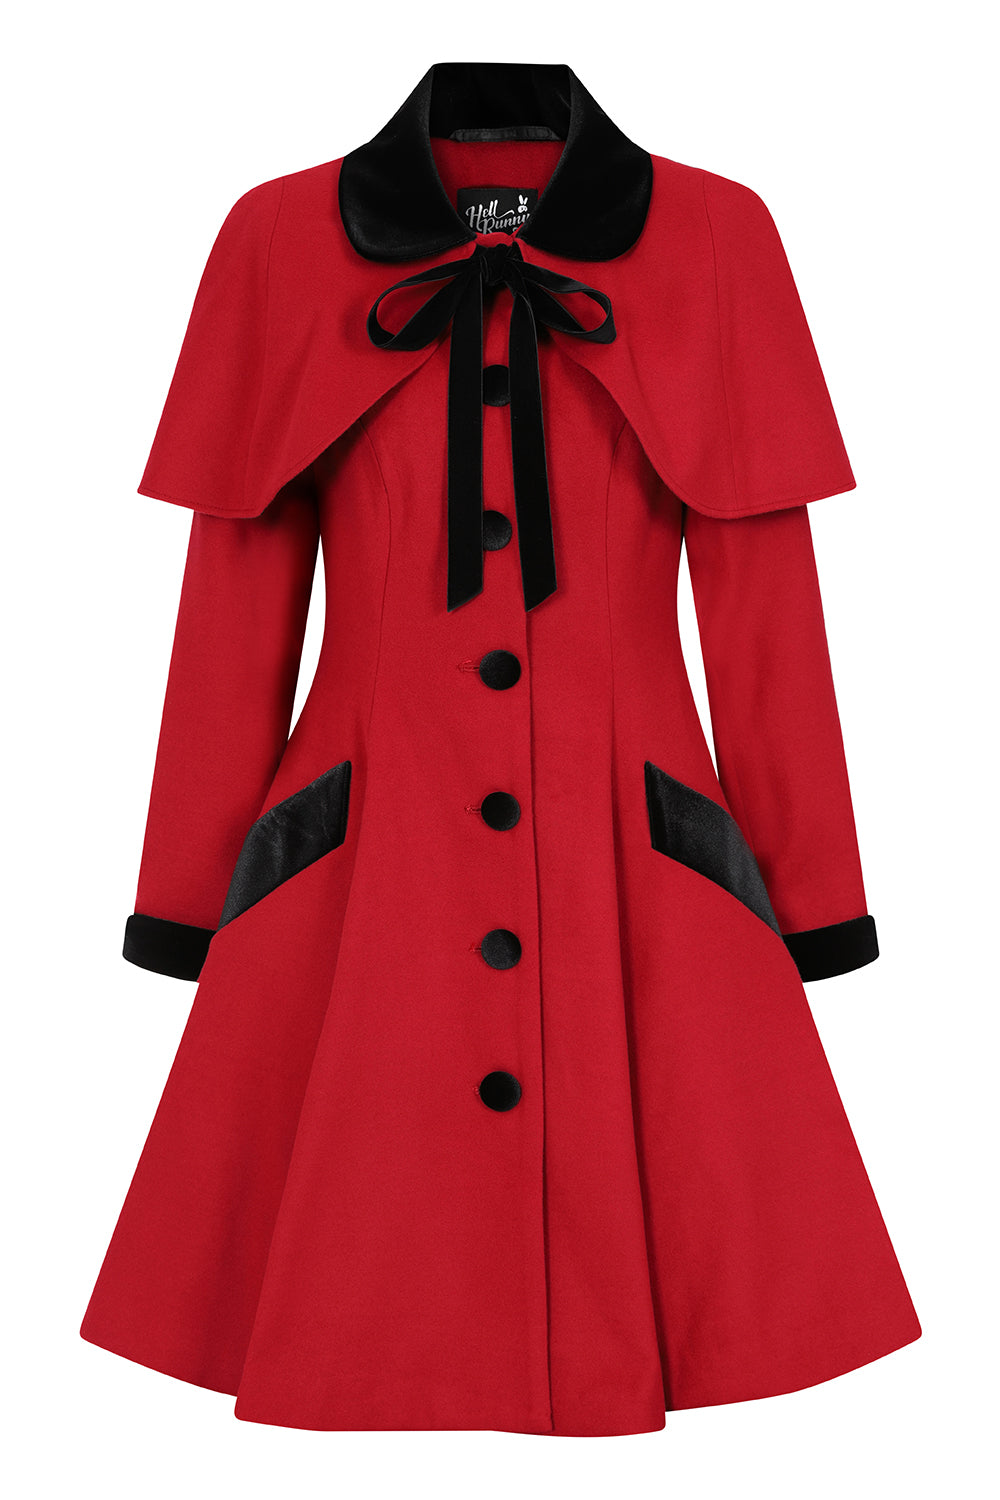 vintage red coat with detachable cape and black contrast buttons, collar and cuffs